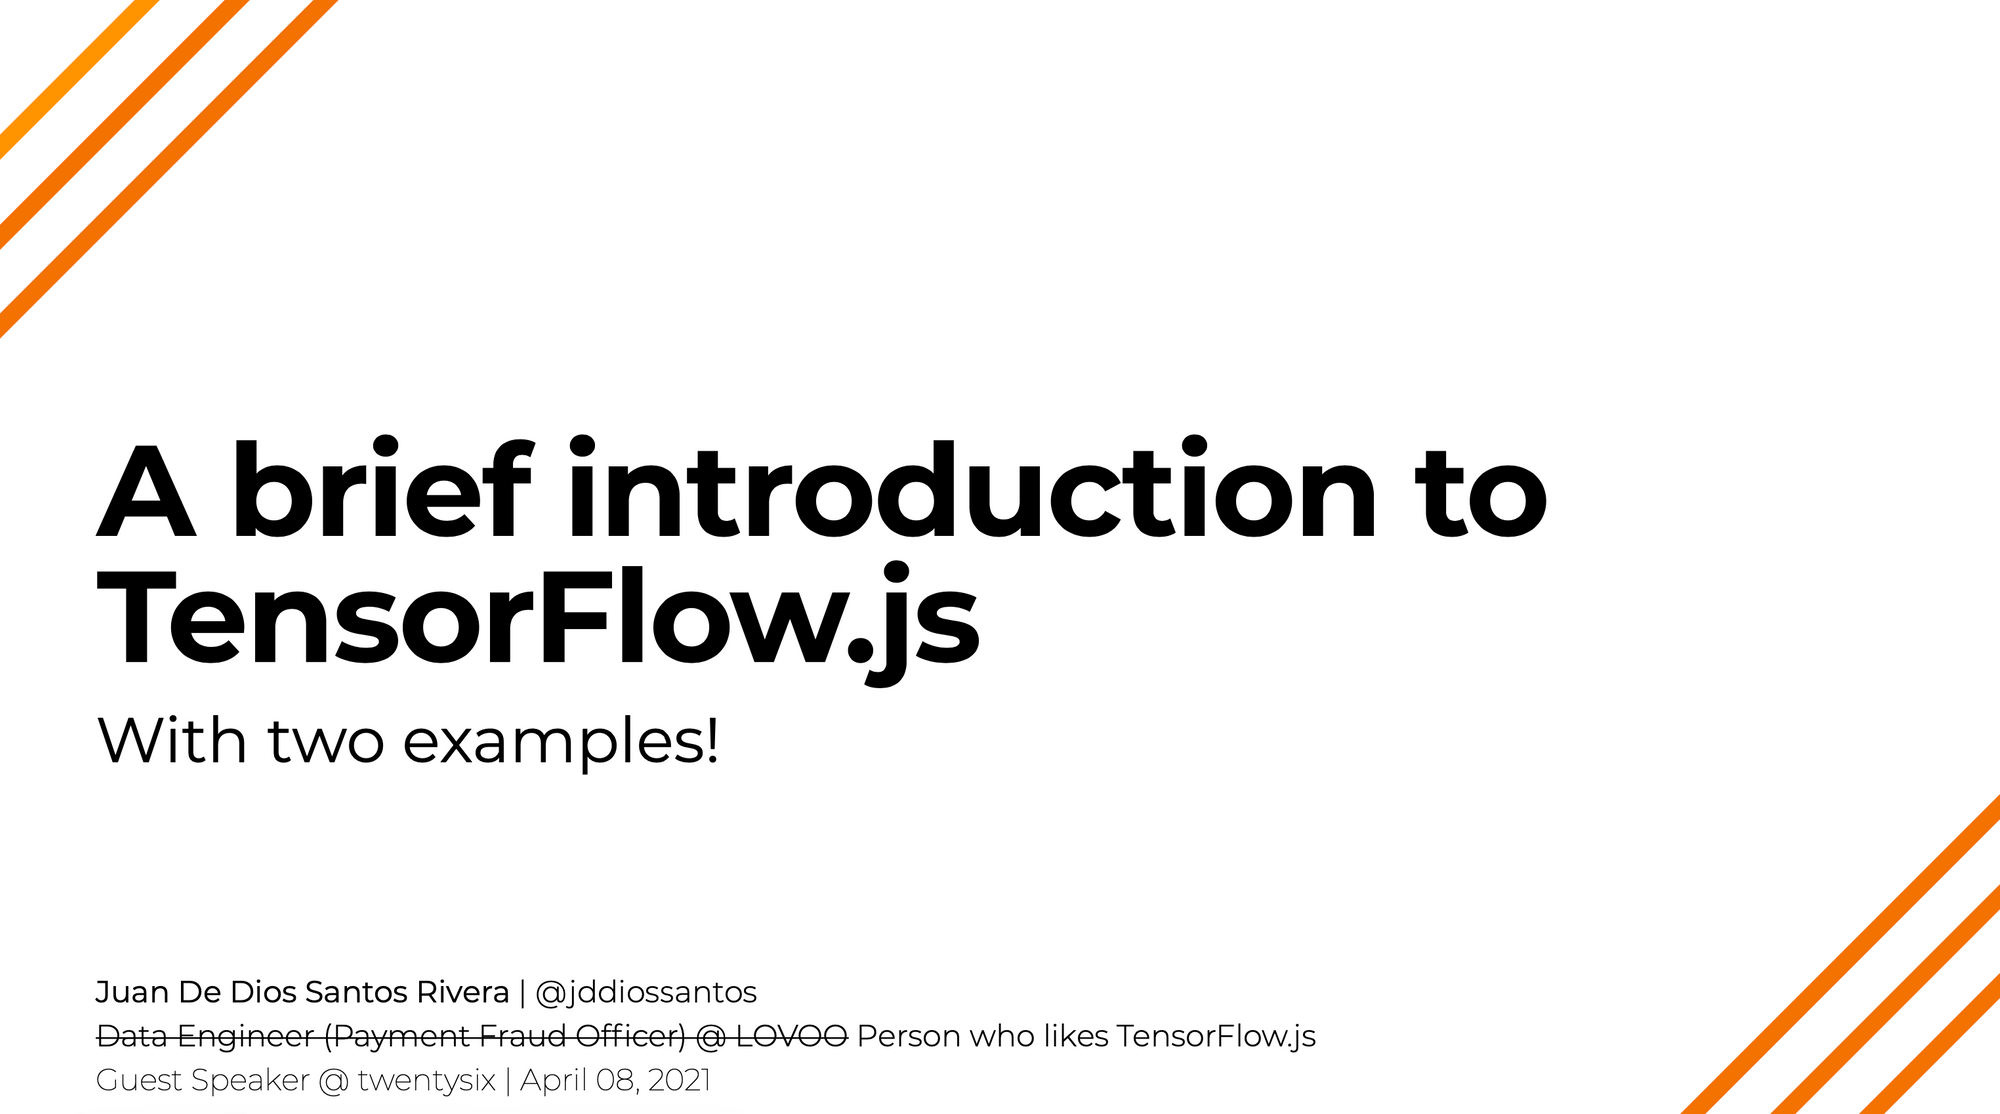 A brief introduction to TensorFlow.js—a presentation